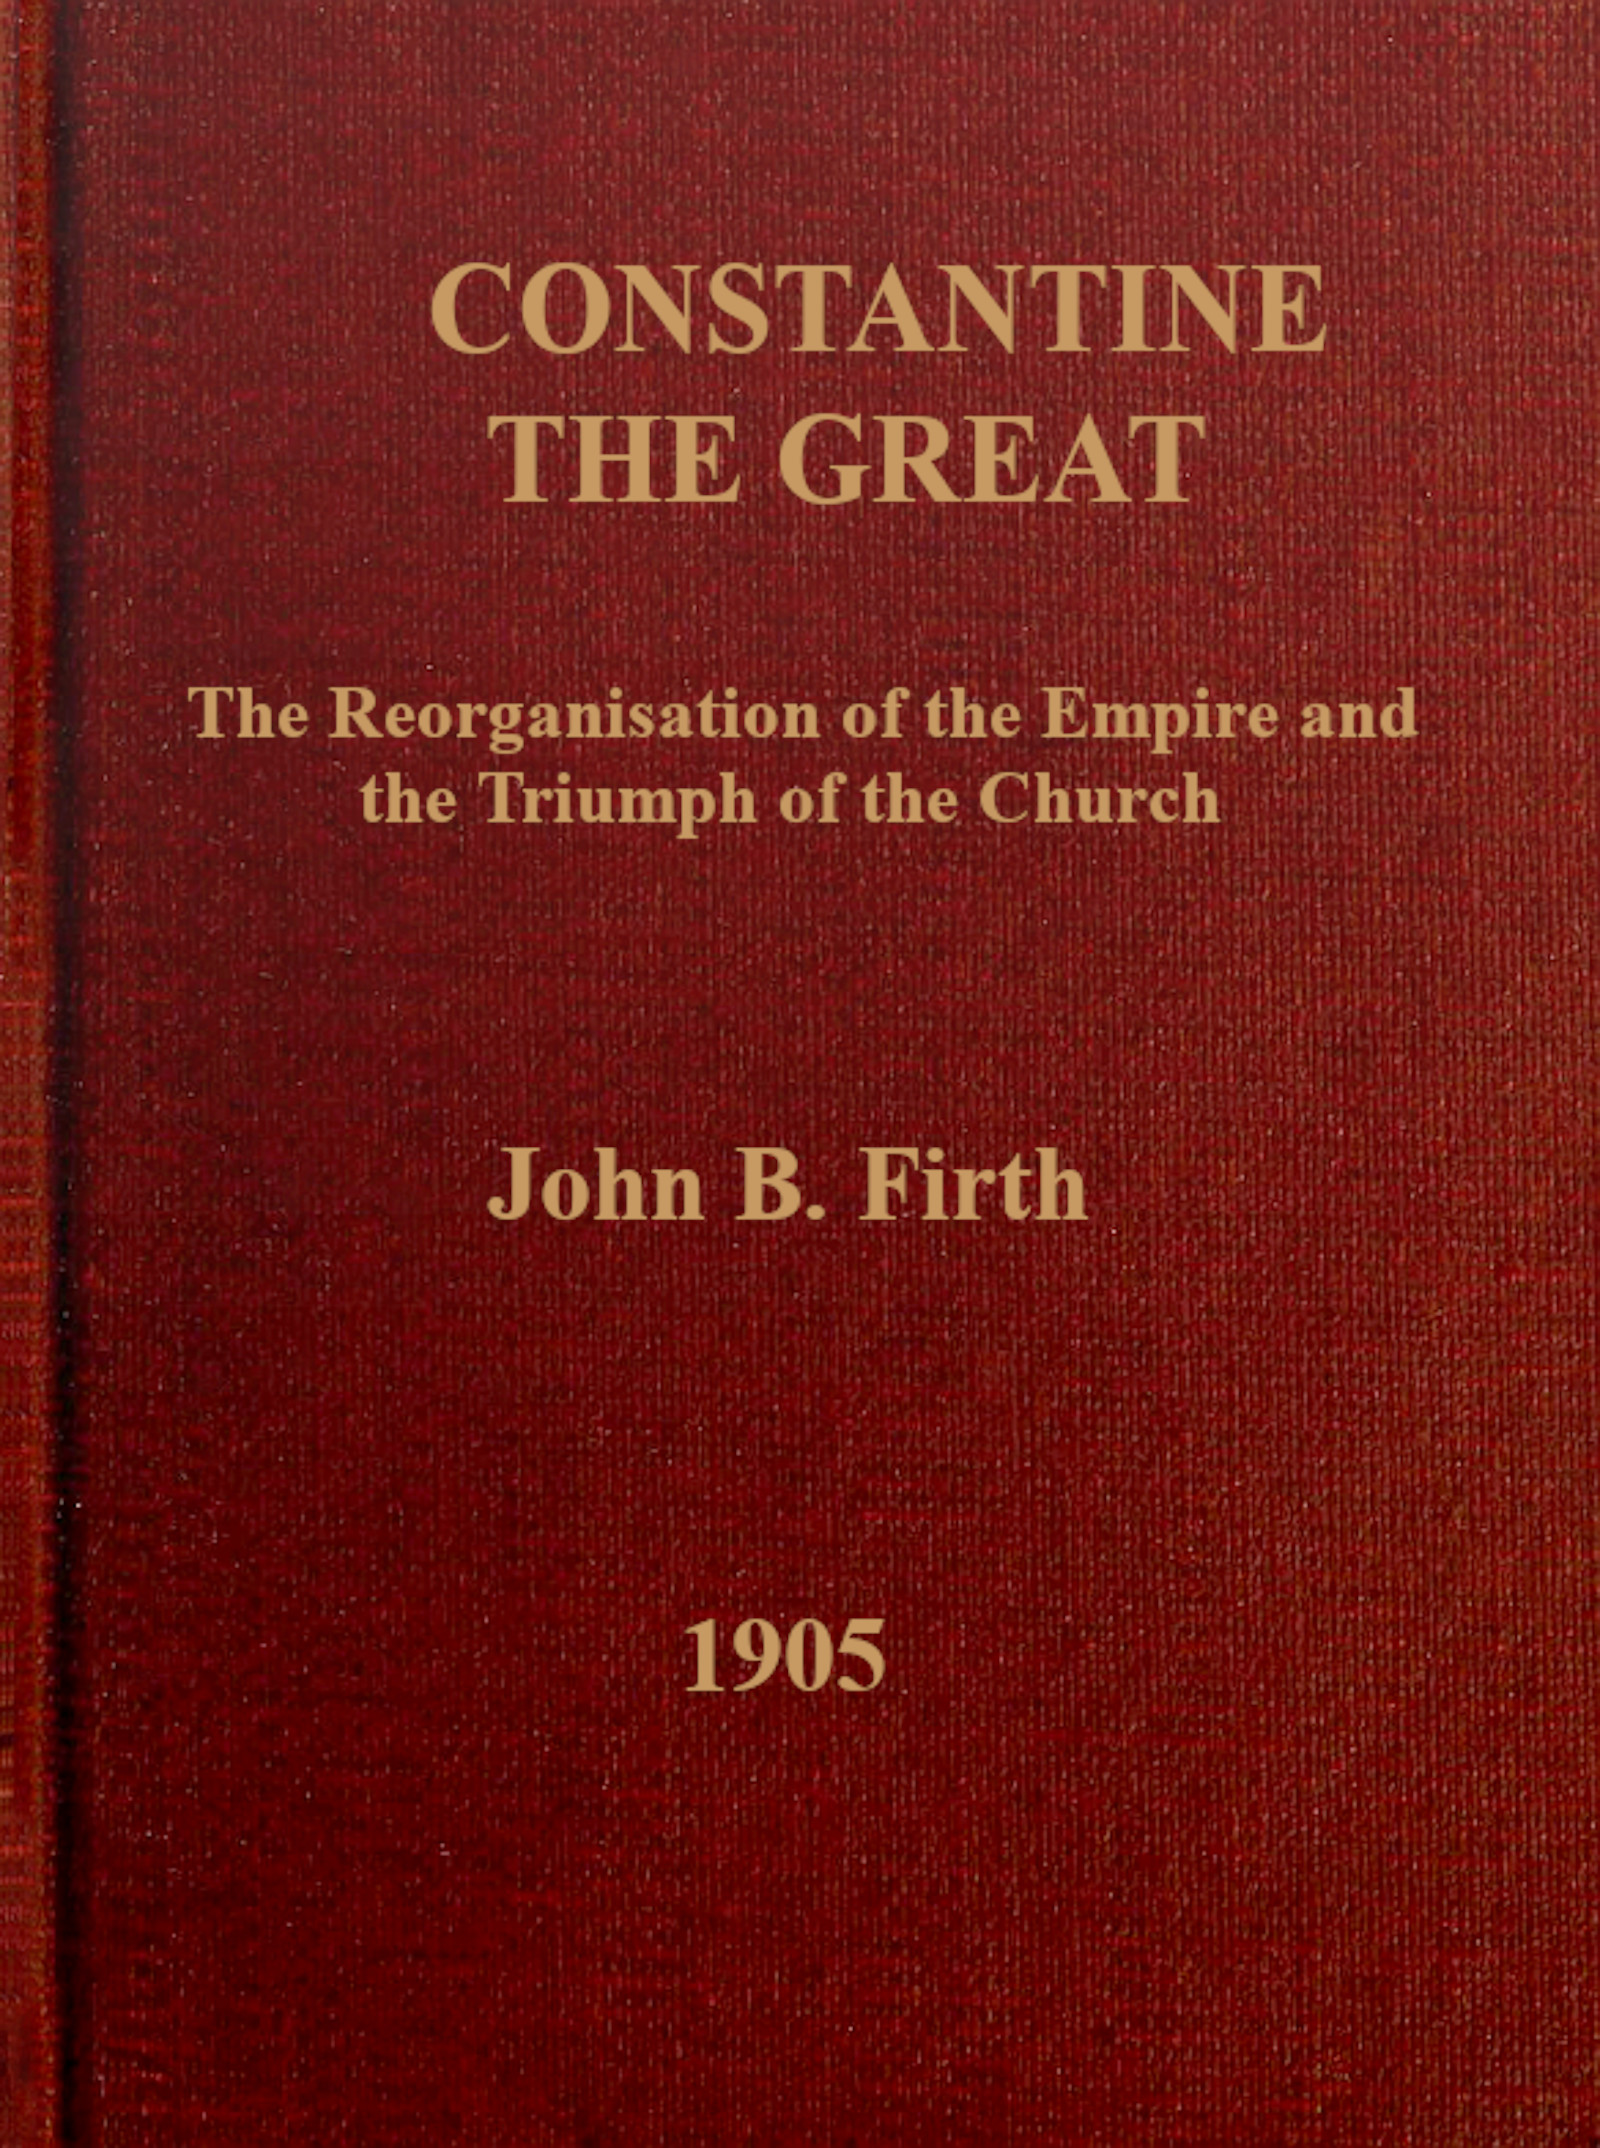 Constantine the Great: The reorganization of the Empire and the triumph of the Church